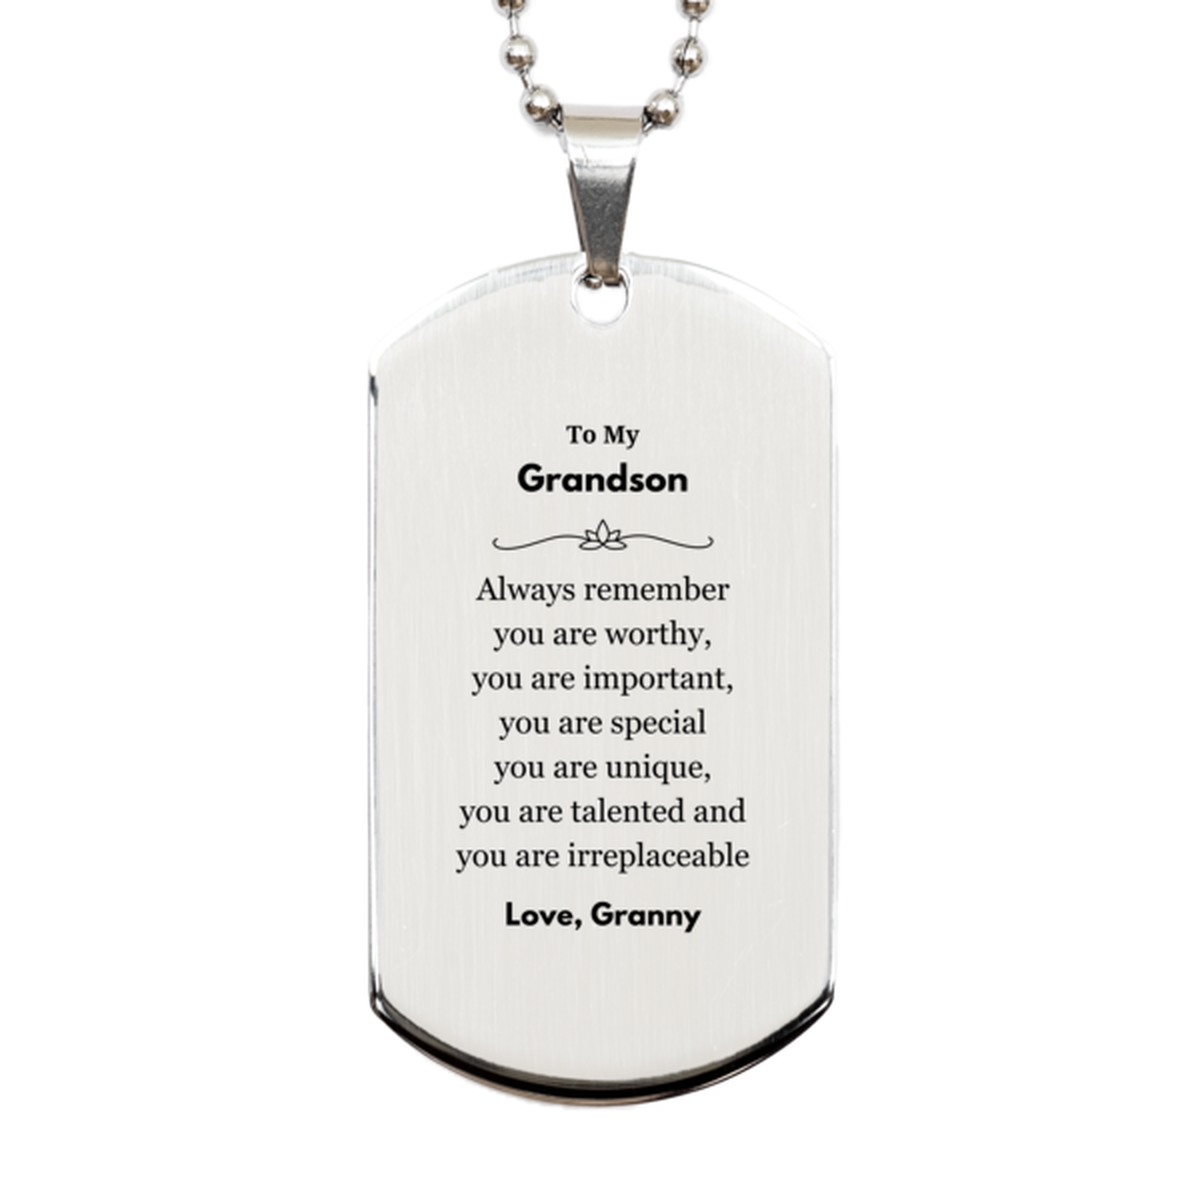 Grandson Birthday Gifts from Granny, Inspirational Silver Dog Tag for Grandson Christmas Graduation Gifts for Grandson Always remember you are worthy, you are important. Love, Granny